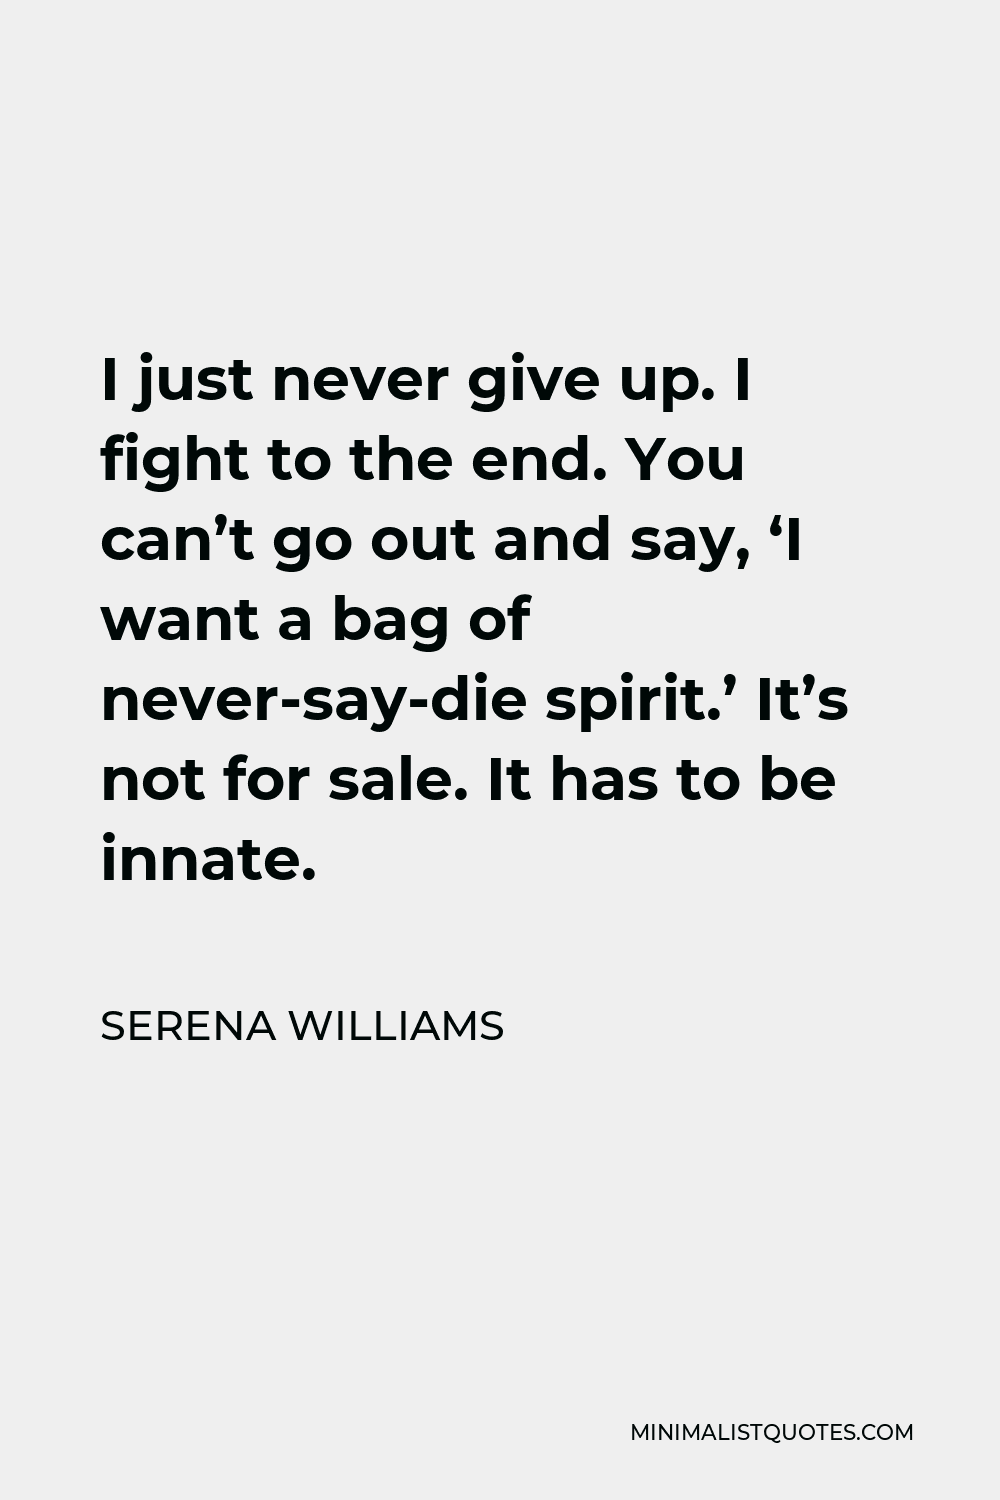 Serena Williams Quote - I just never give up. I fight to the end. You can’t go out and say, ‘I want a bag of never-say-die spirit.’ It’s not for sale. It has to be innate.